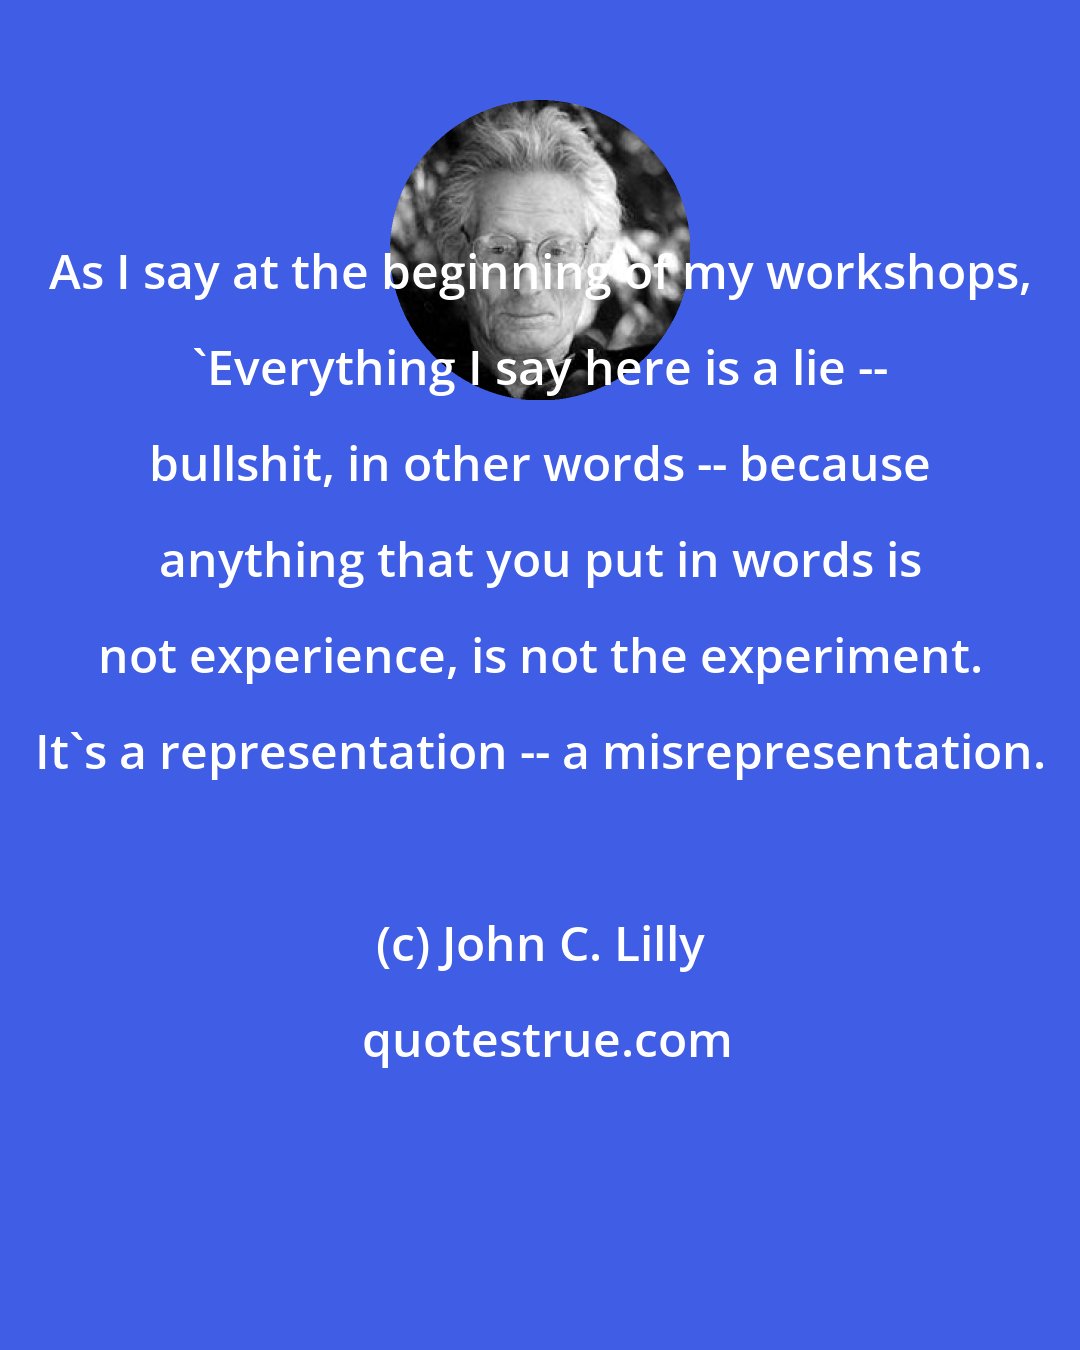 John C. Lilly: As I say at the beginning of my workshops, 'Everything I say here is a lie -- bullshit, in other words -- because anything that you put in words is not experience, is not the experiment. It's a representation -- a misrepresentation.